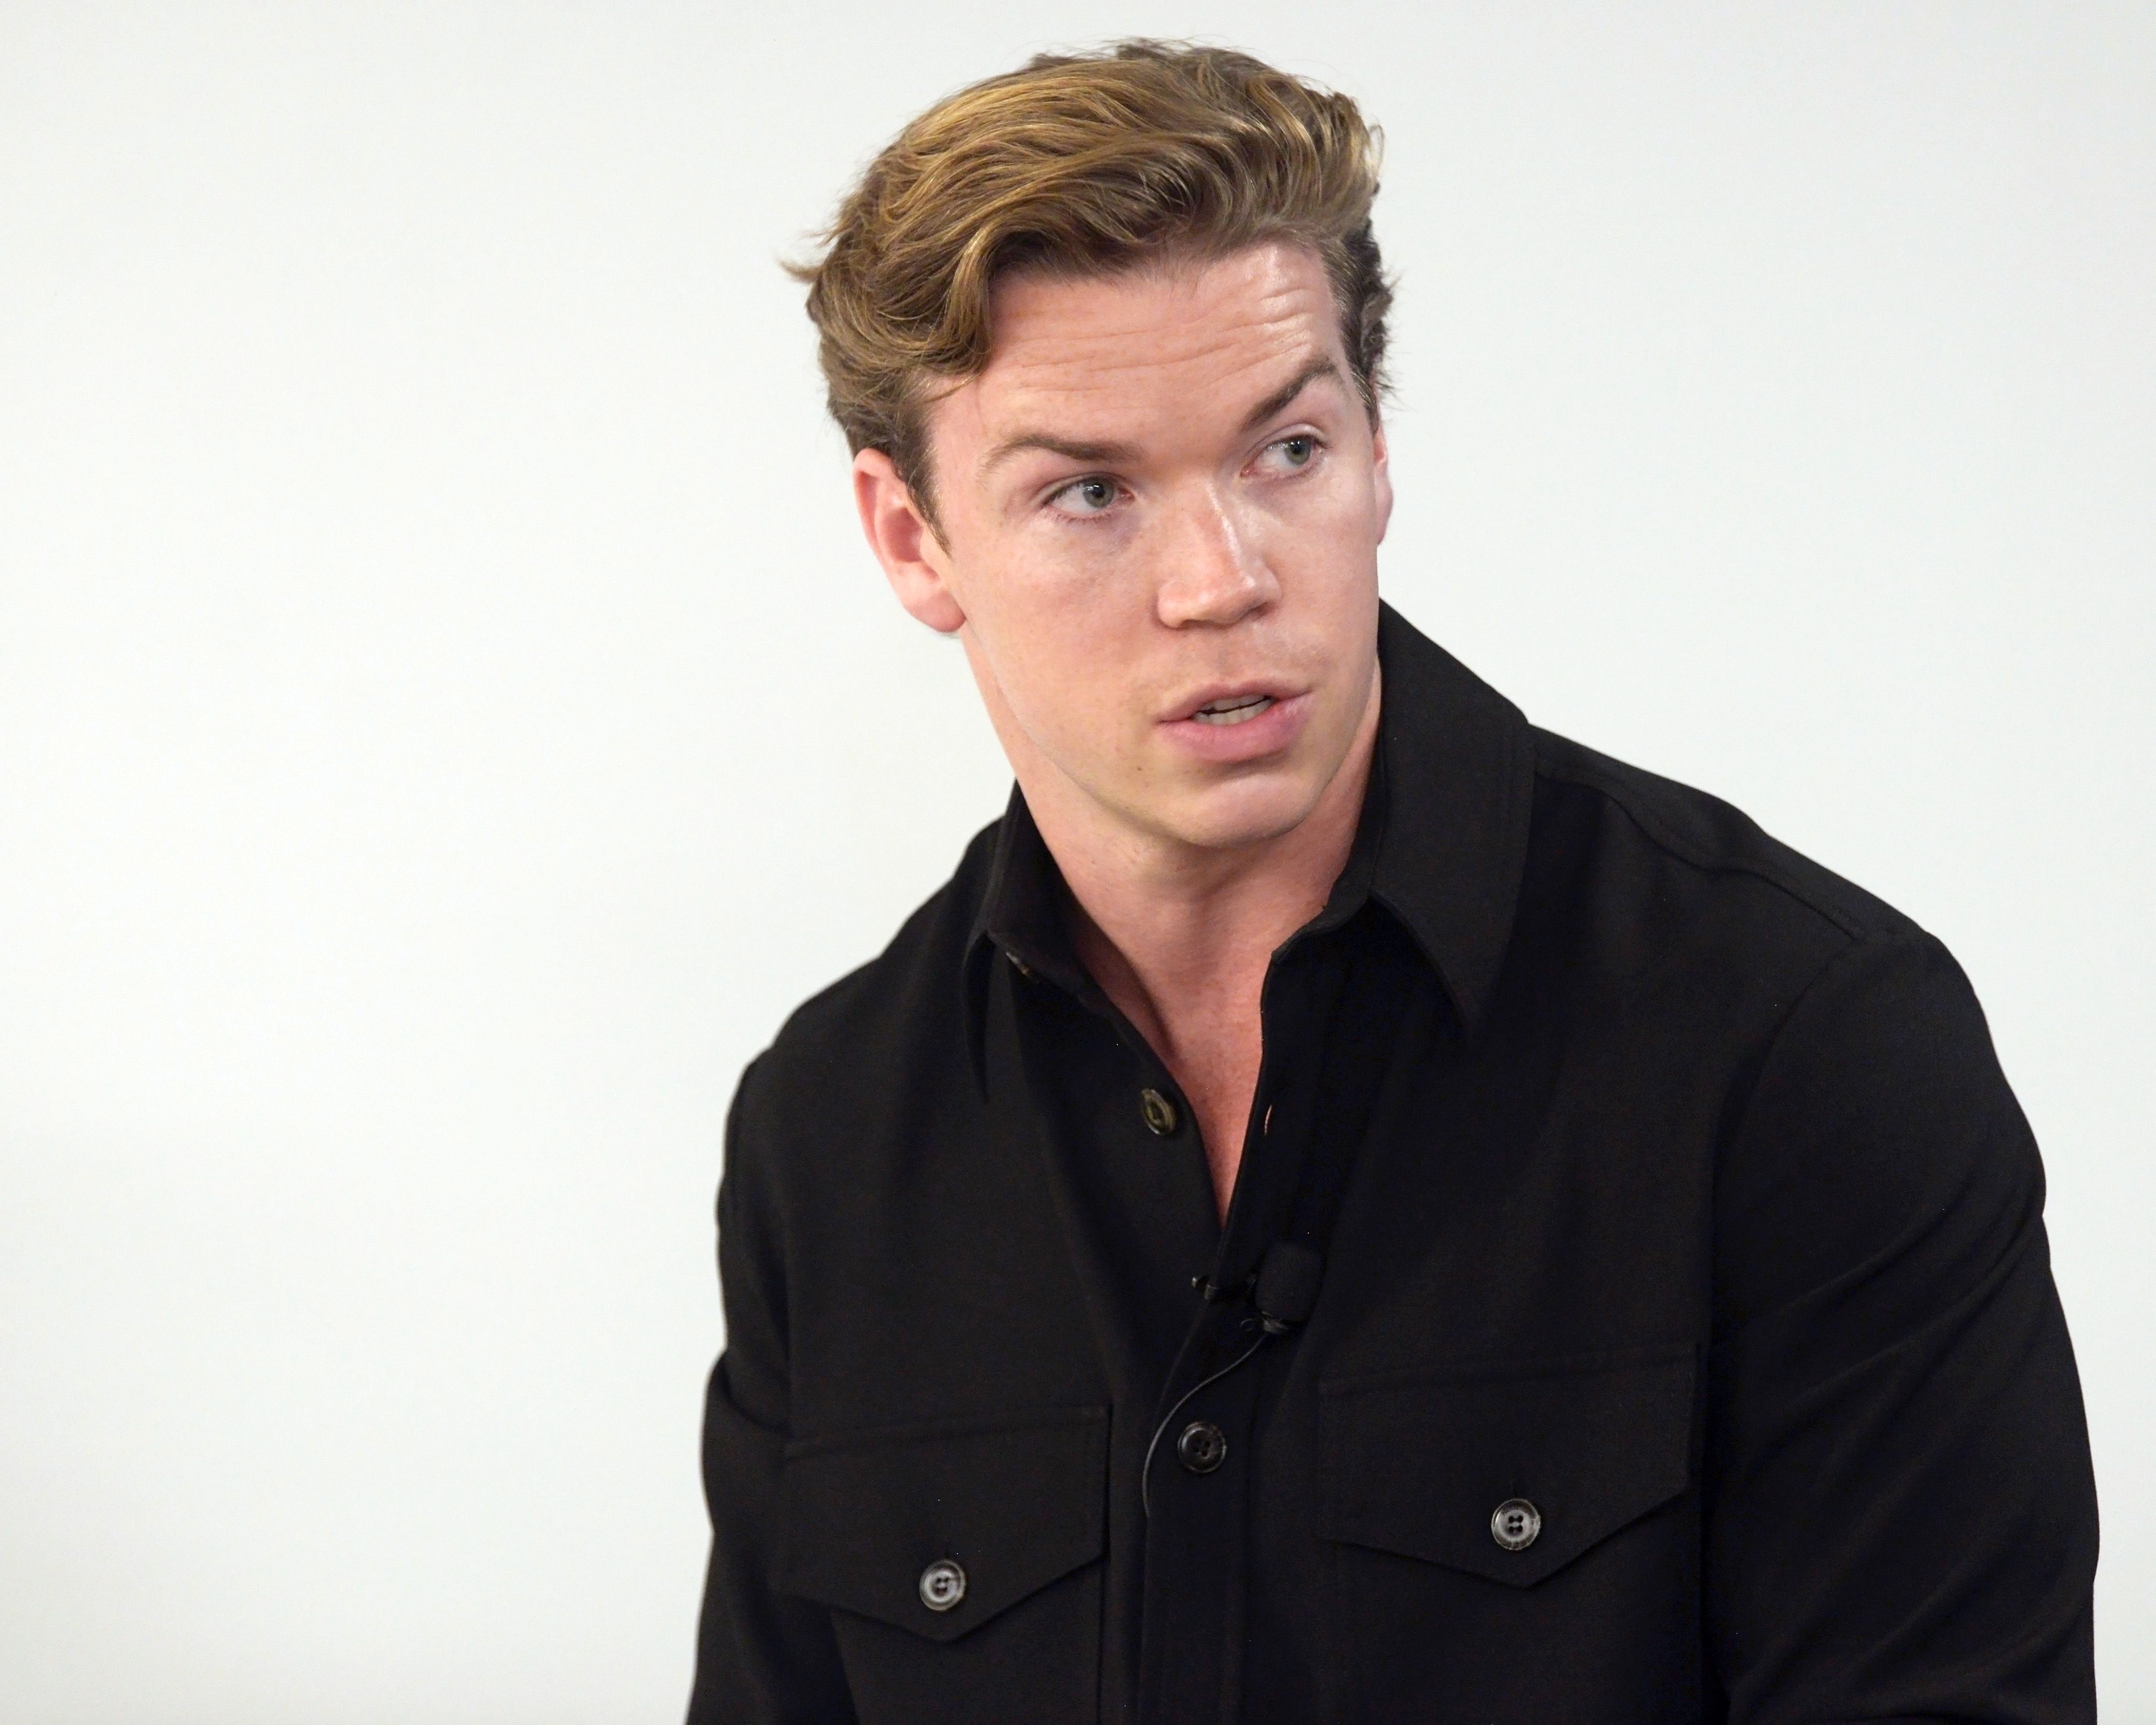 Marvel Star Will Poulter Calls Superhero Body Transformations 'Unhealthy' and 'Unrealistic'